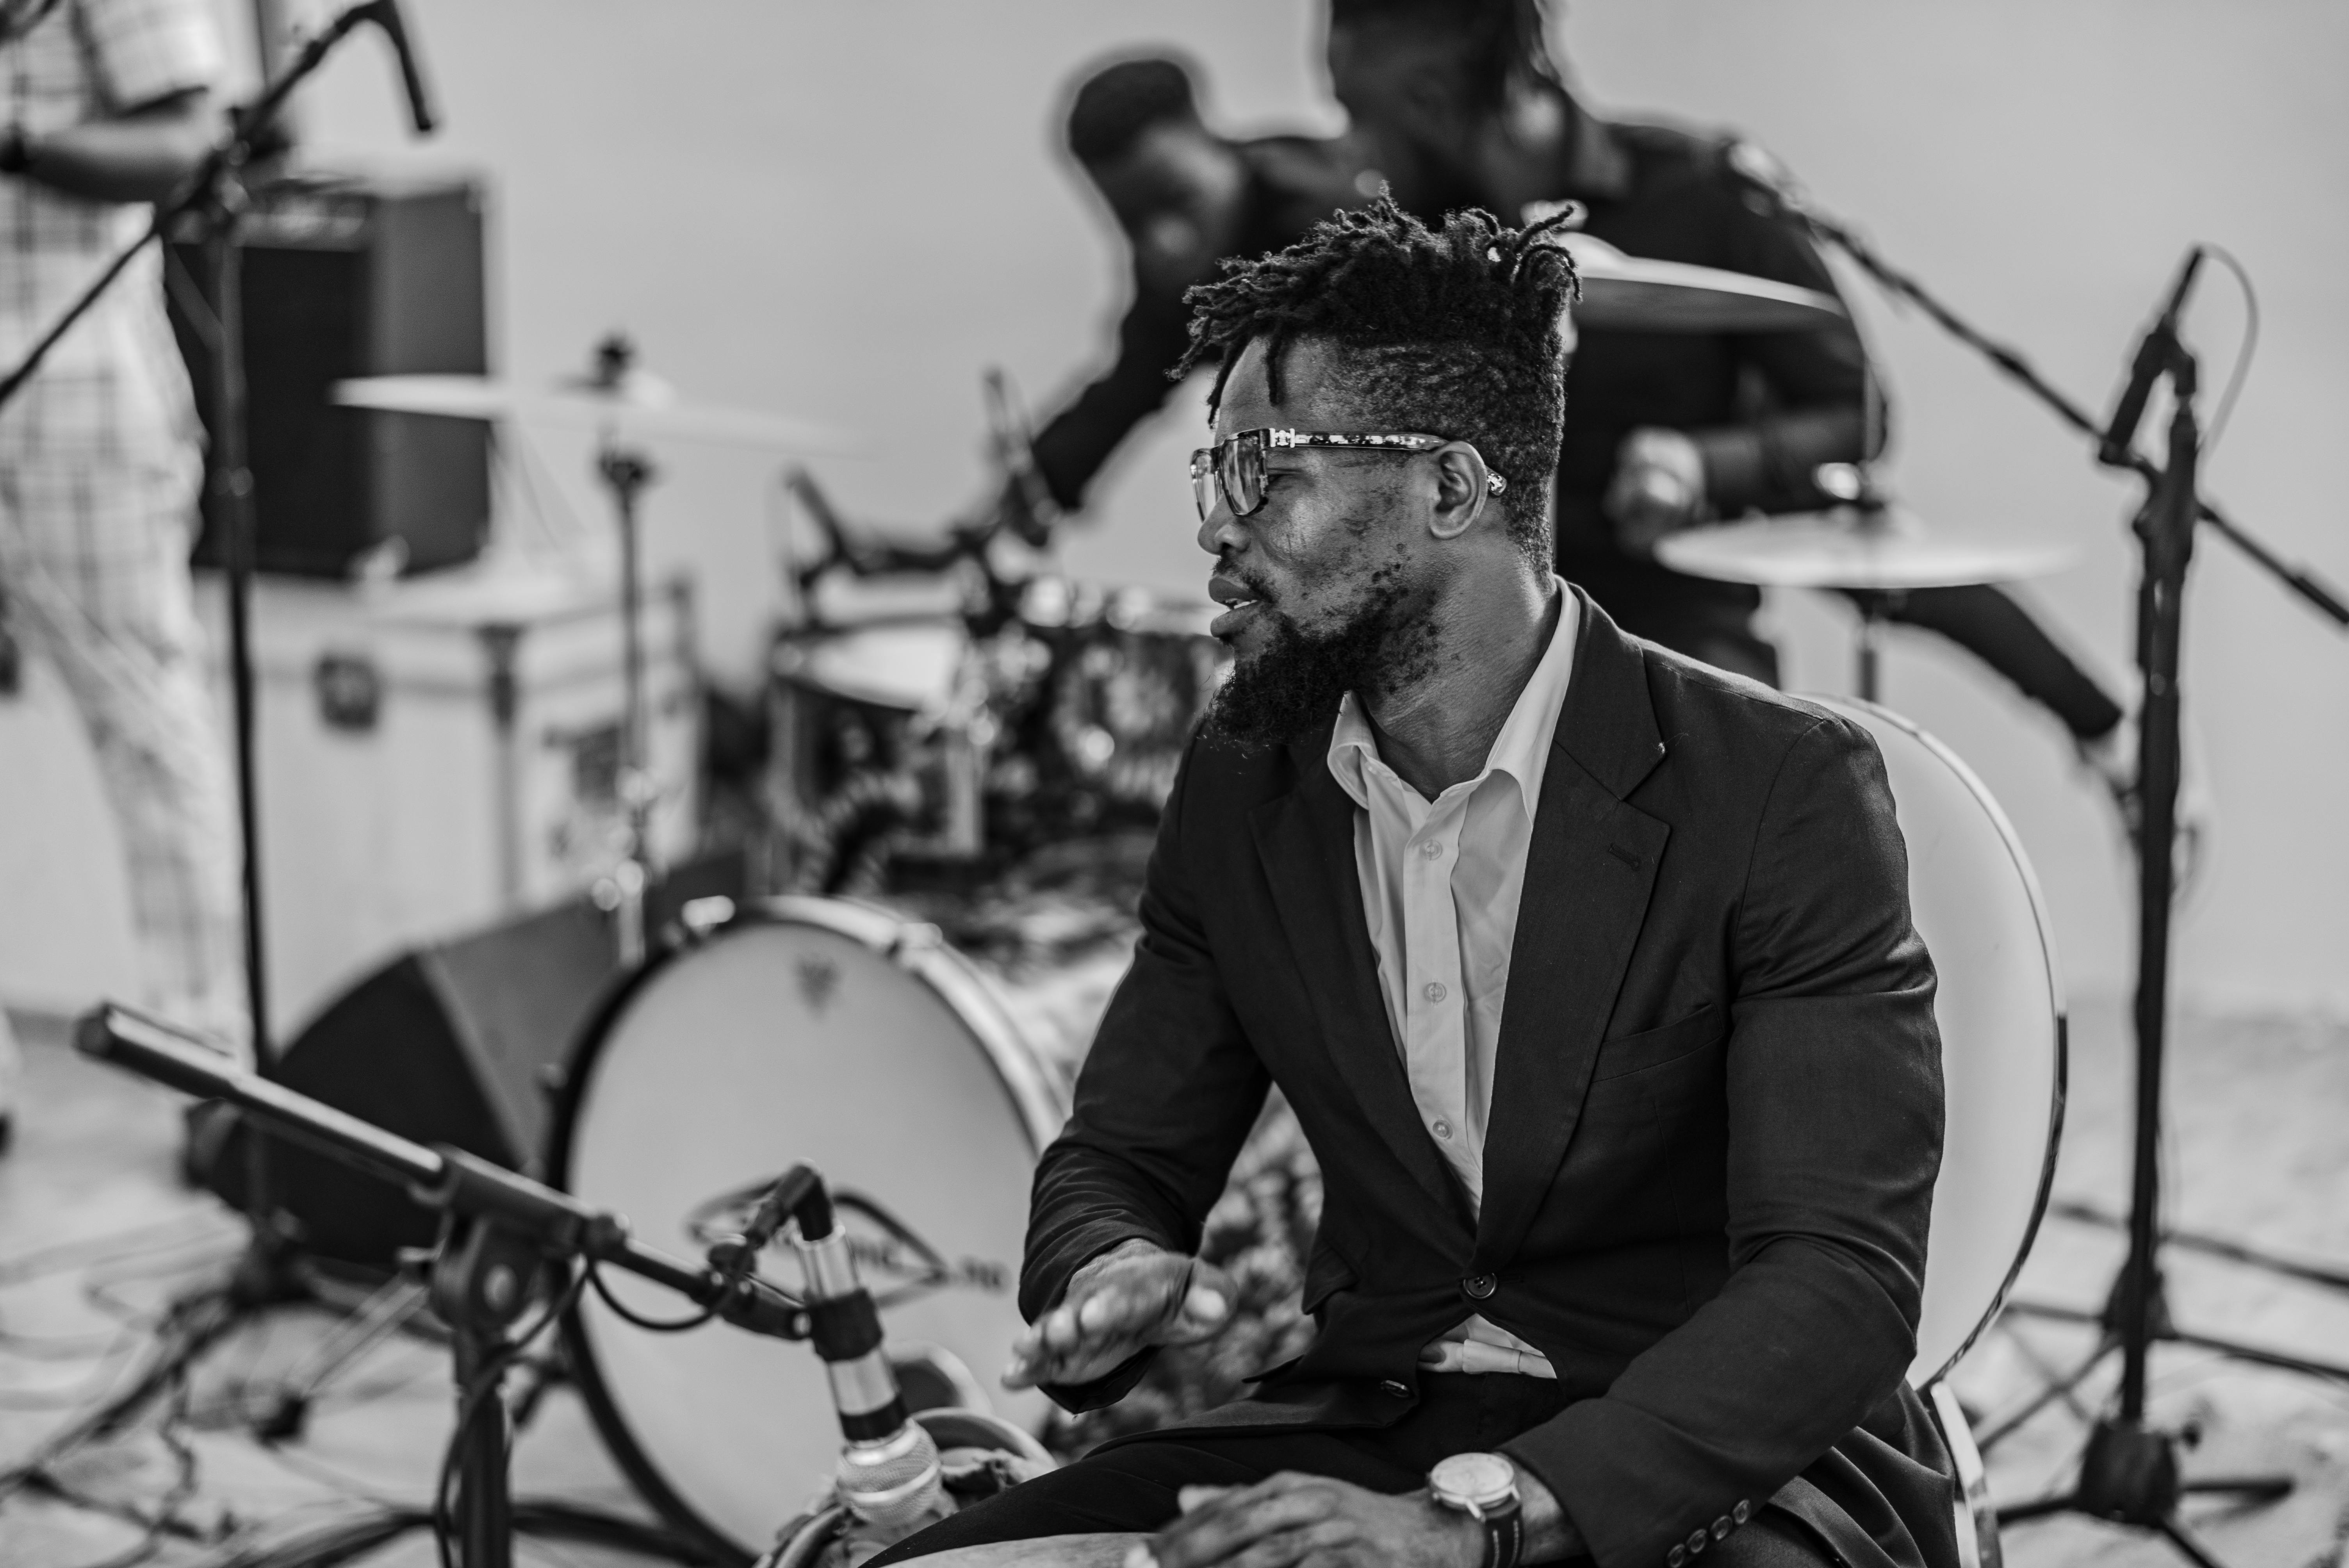 Black Muslim Man Playing Drums In Web Browser Window Online Music Theory  Concept Portrait Horizontal Stock Illustration - Download Image Now - iStock